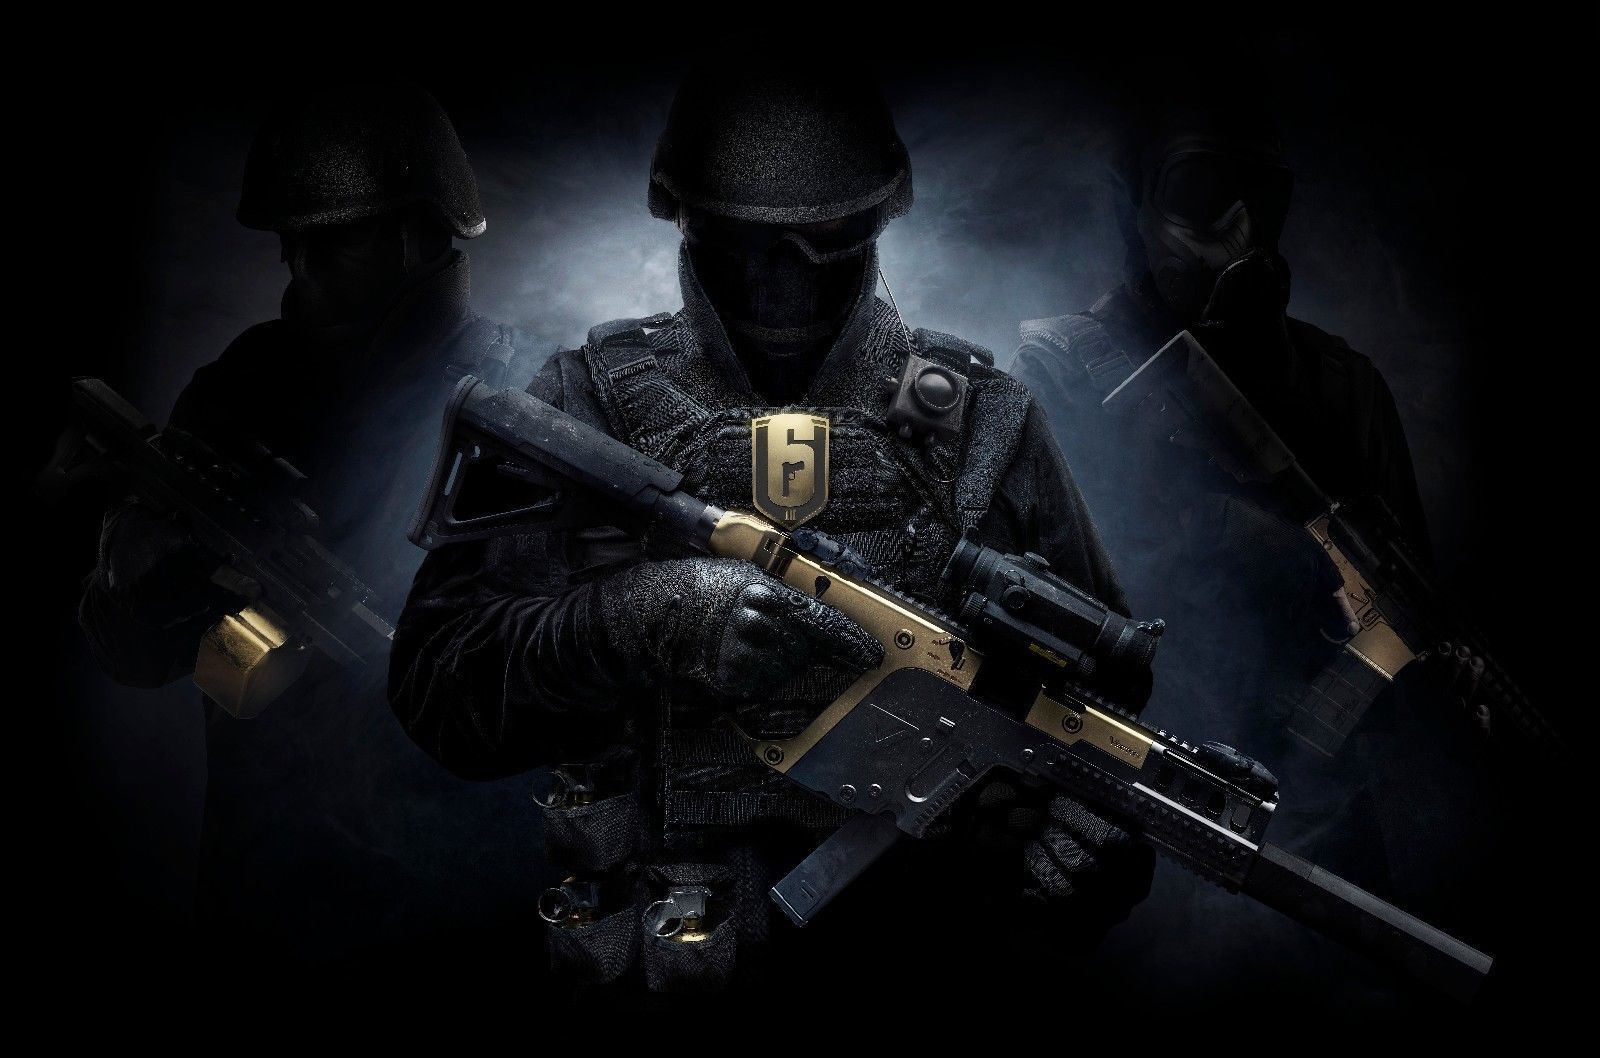 Primary image for Tom Clancy's Rainbow Six Siege Poster Game Art Print 14x21" 24x36" 32x48" #2